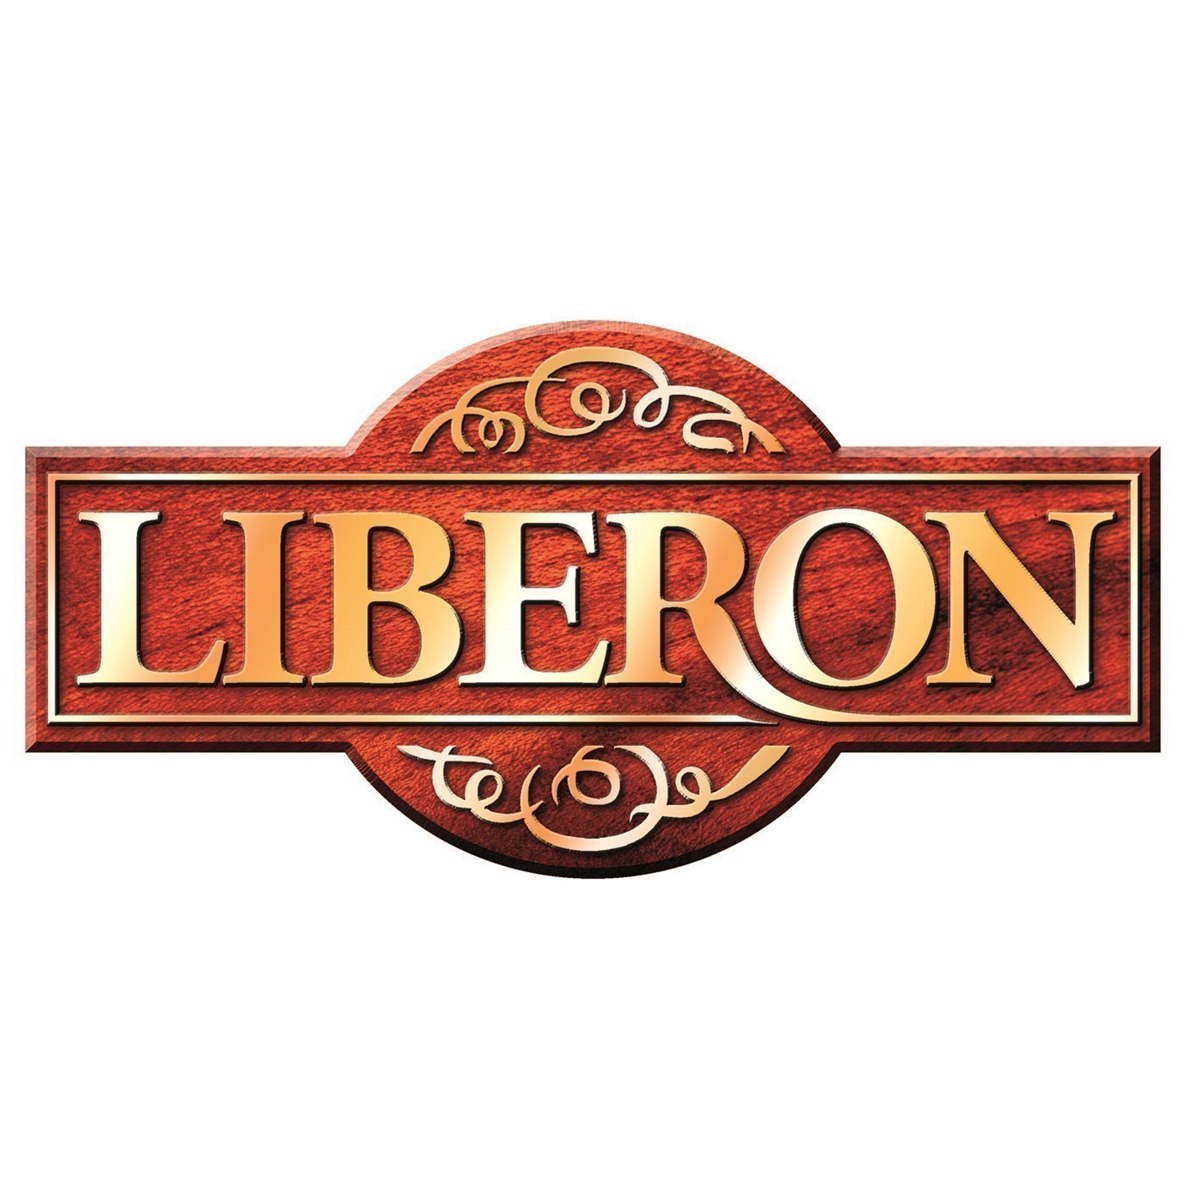 Where to buy Liberon Products online